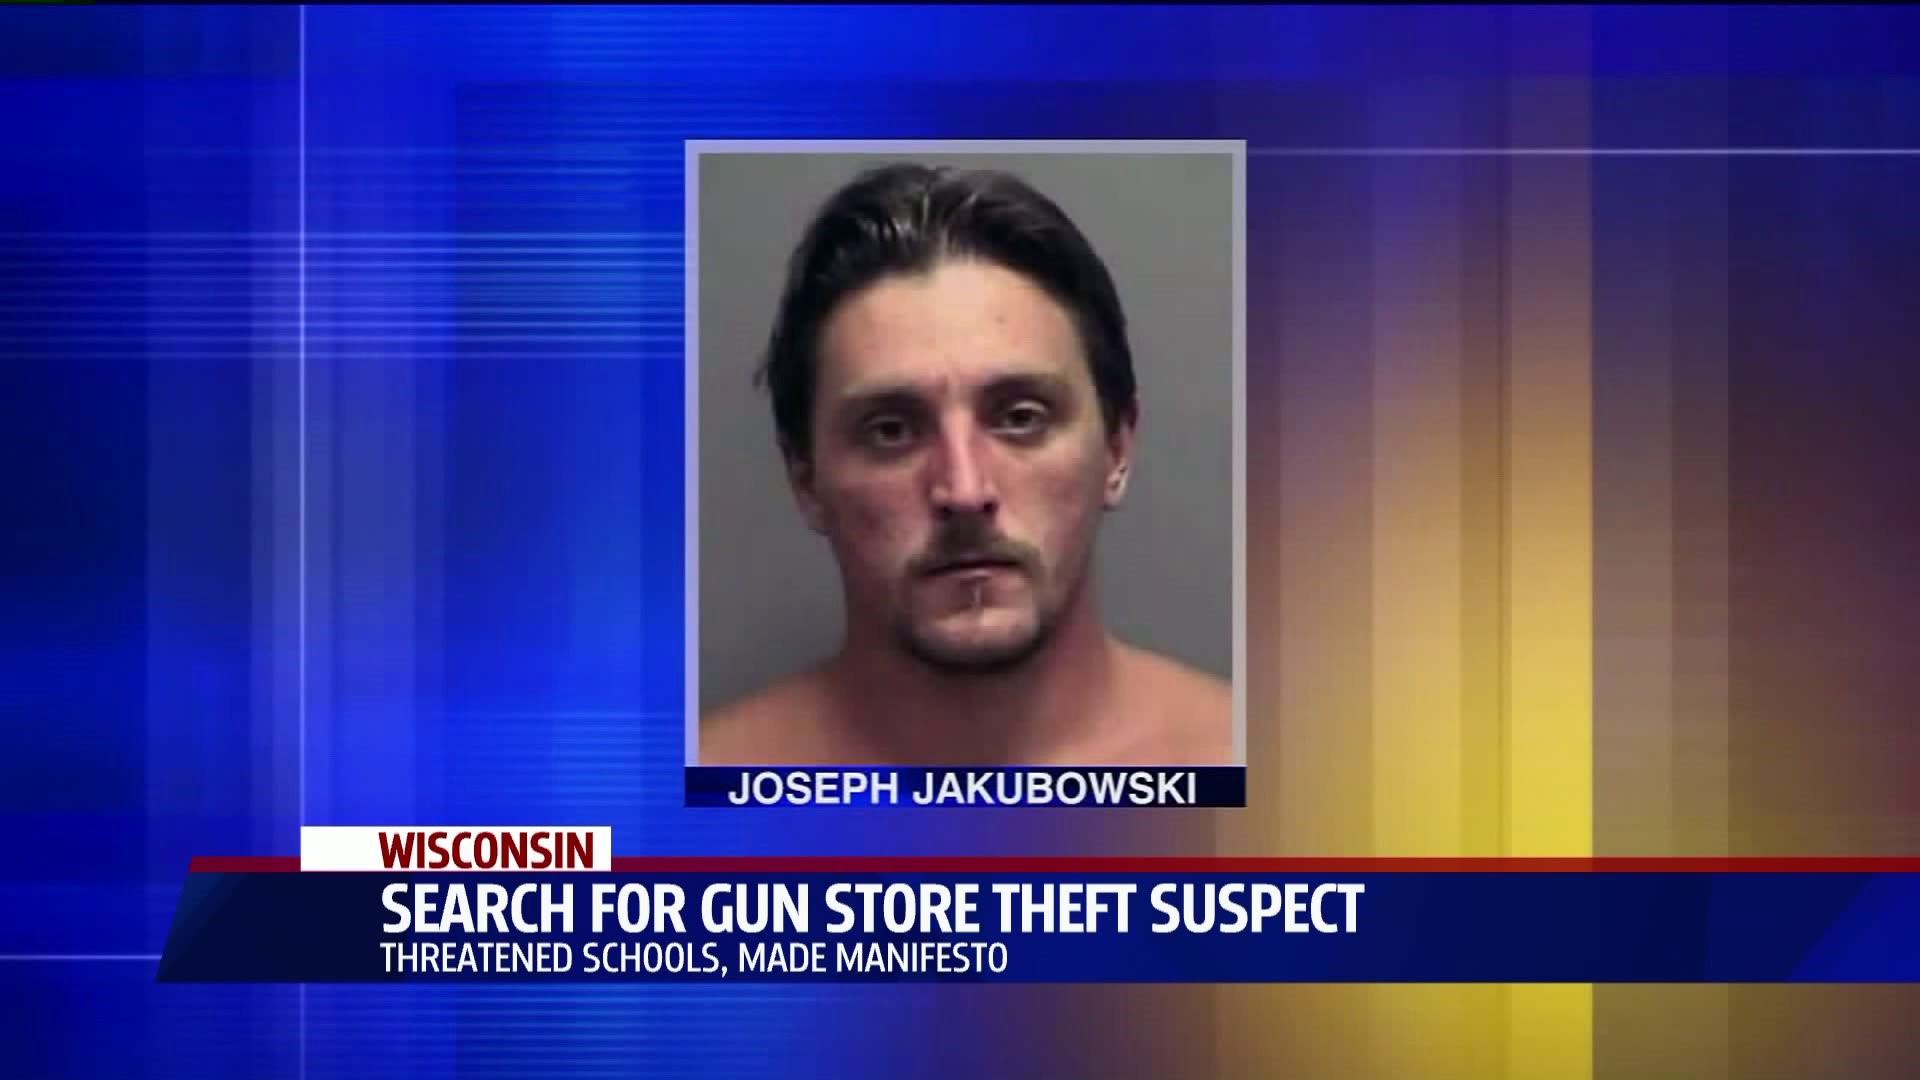 Police track leads in search for Wisconsin gun theft suspect